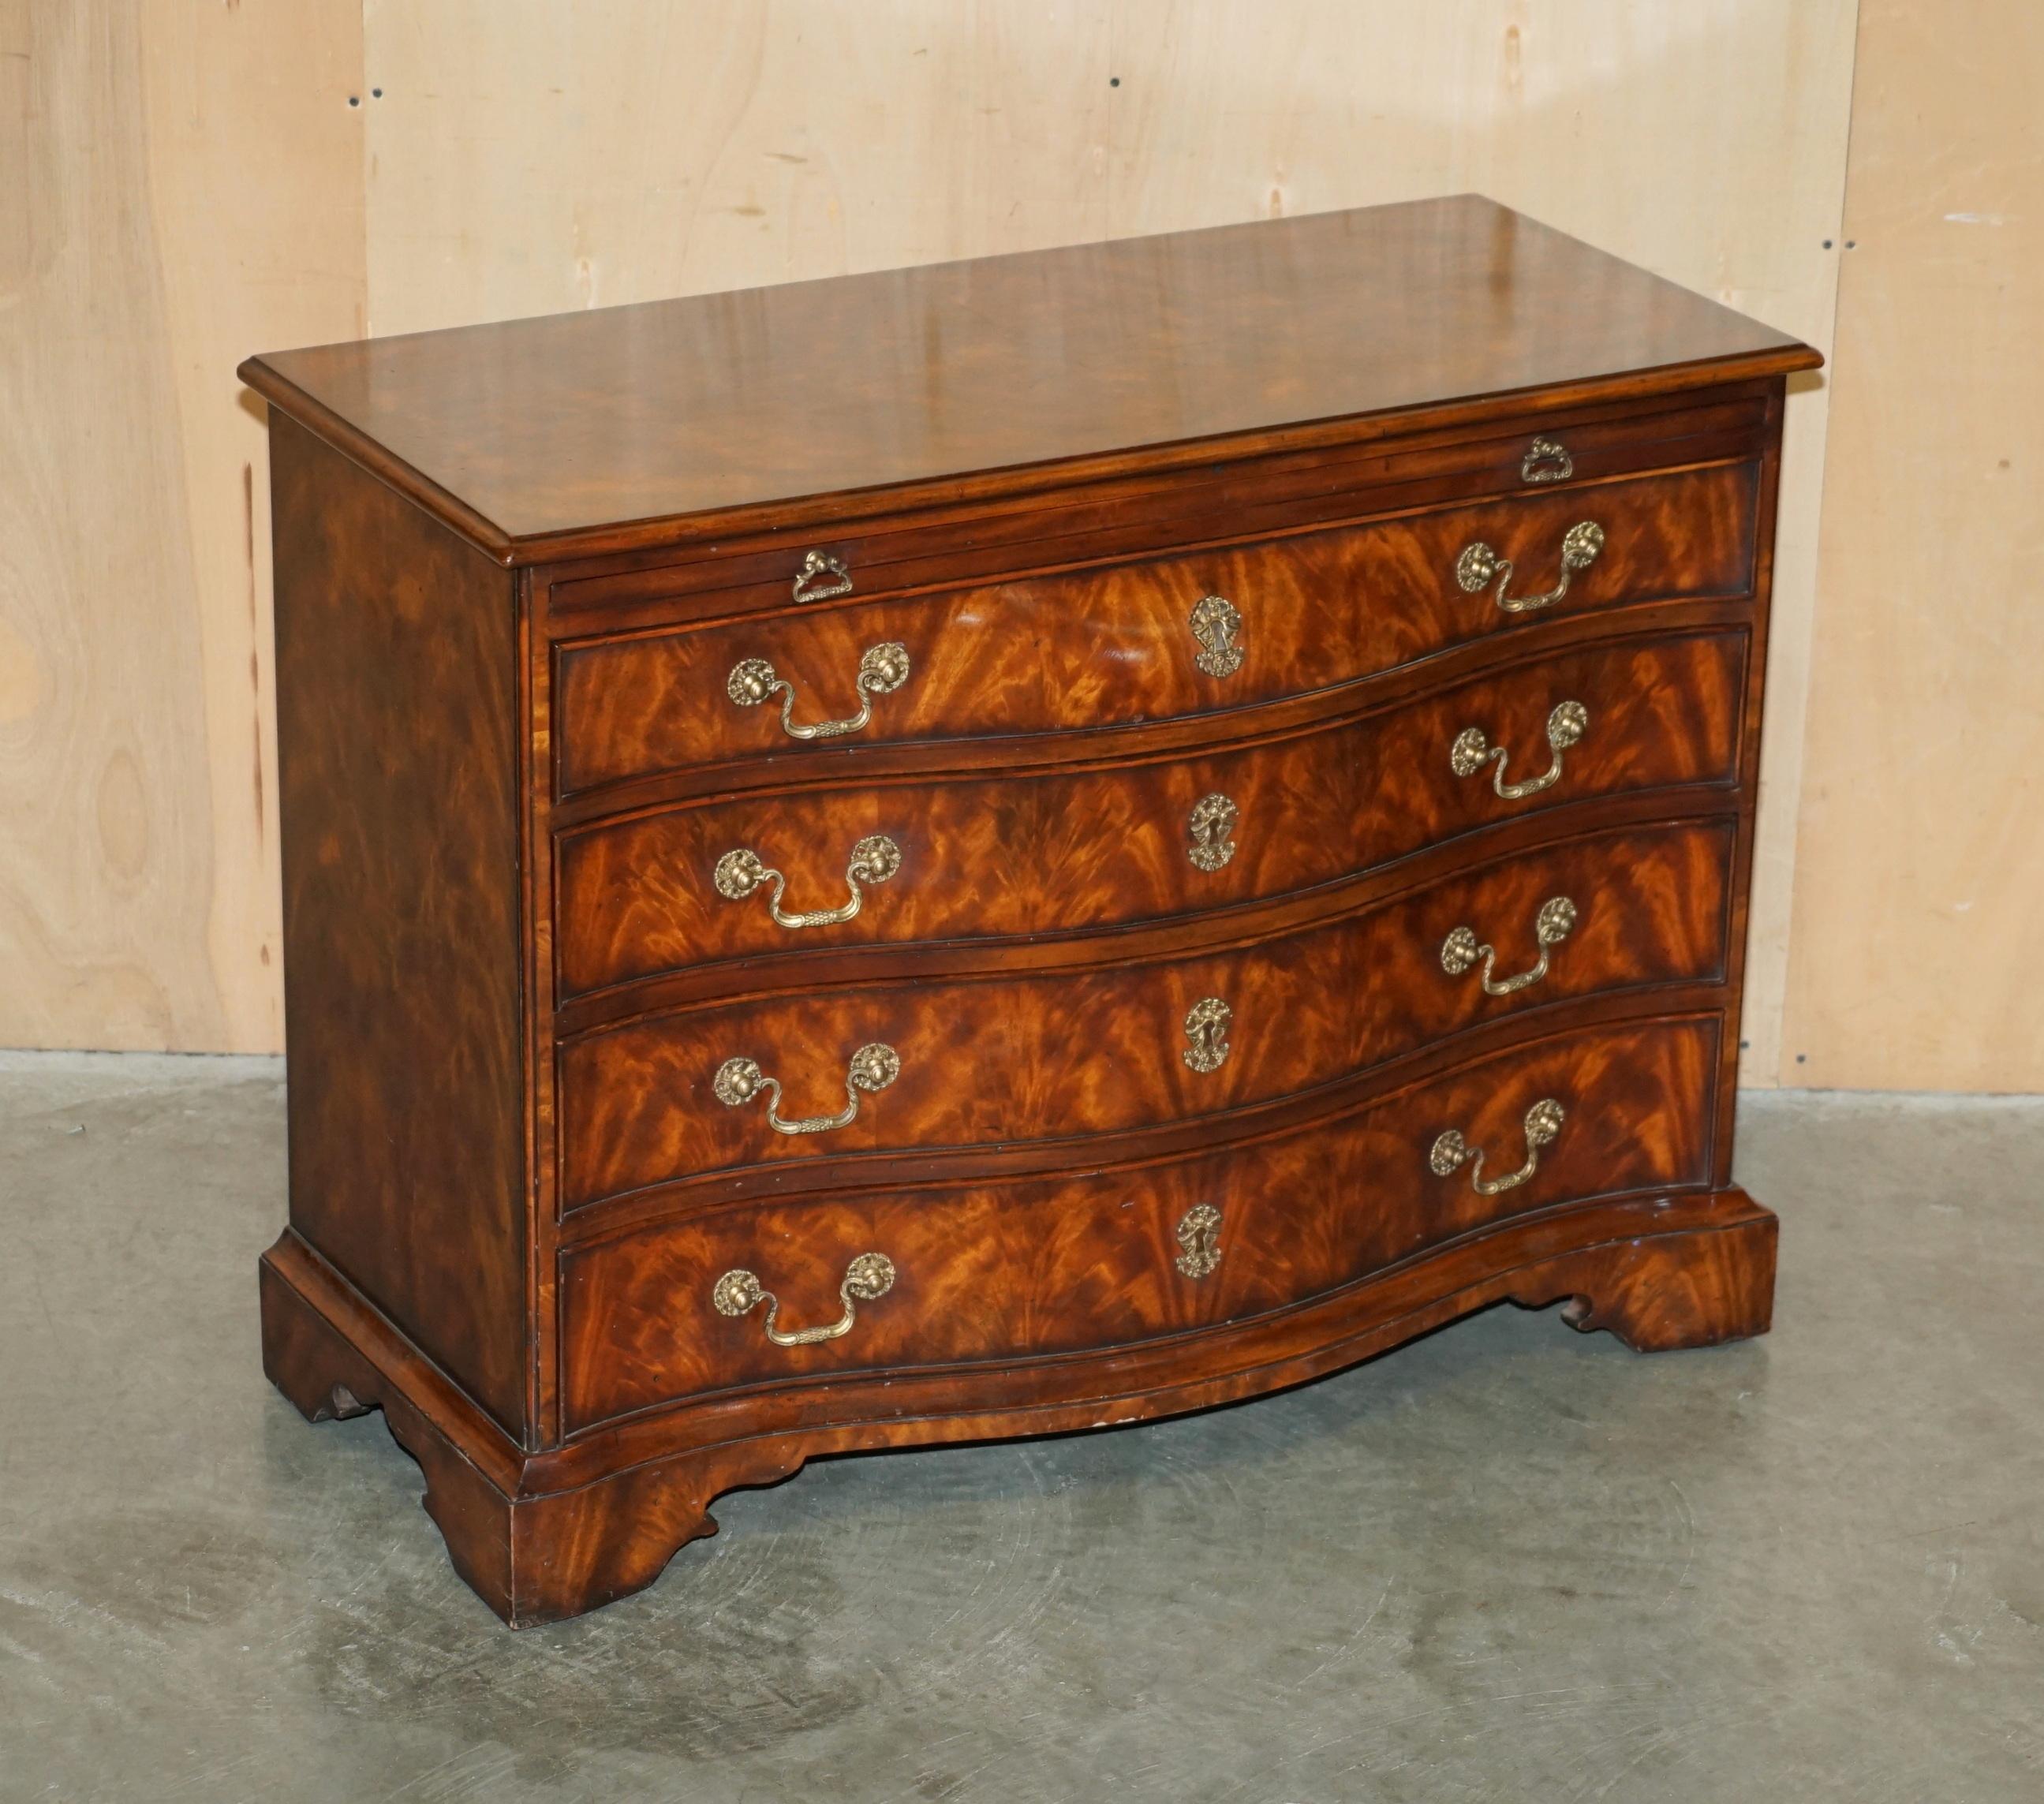 Victorian FINE PAIR OF ALTHORP SPENCER HOUSE FLAMED HARDWOOD SERPENTINE CHEST OF DRAWERs For Sale